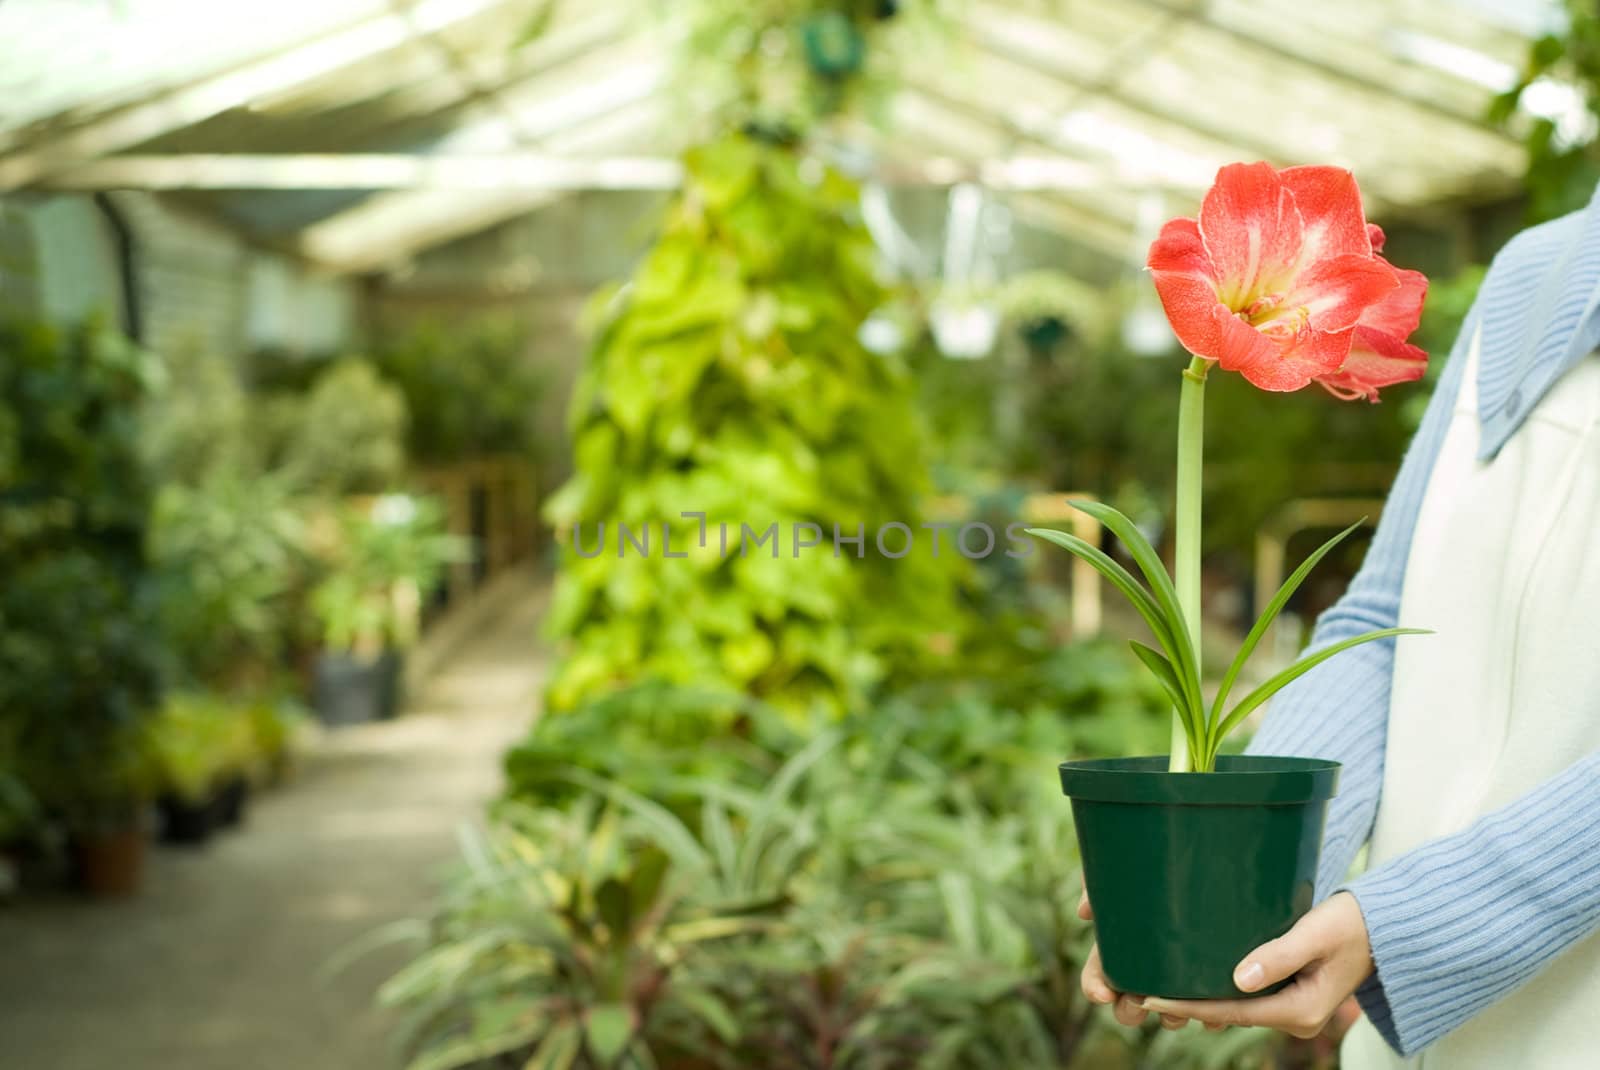 Holding Selected Plant in Hands by alistaircotton